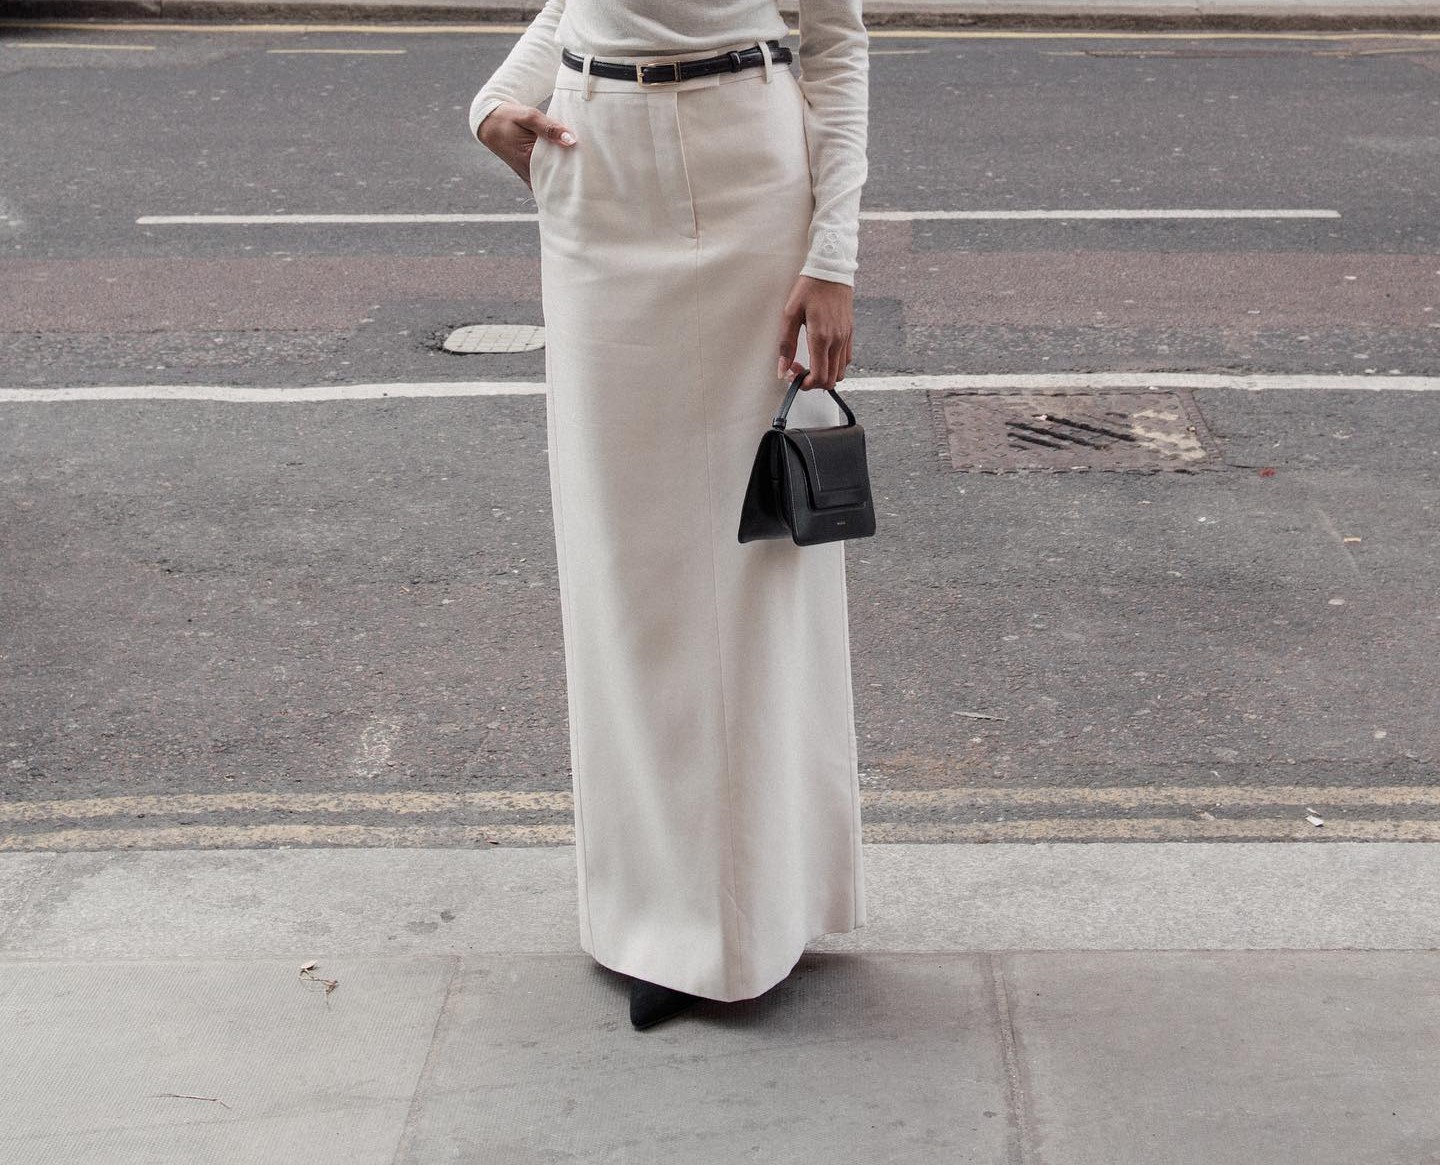 A woman in a white maxi skirt